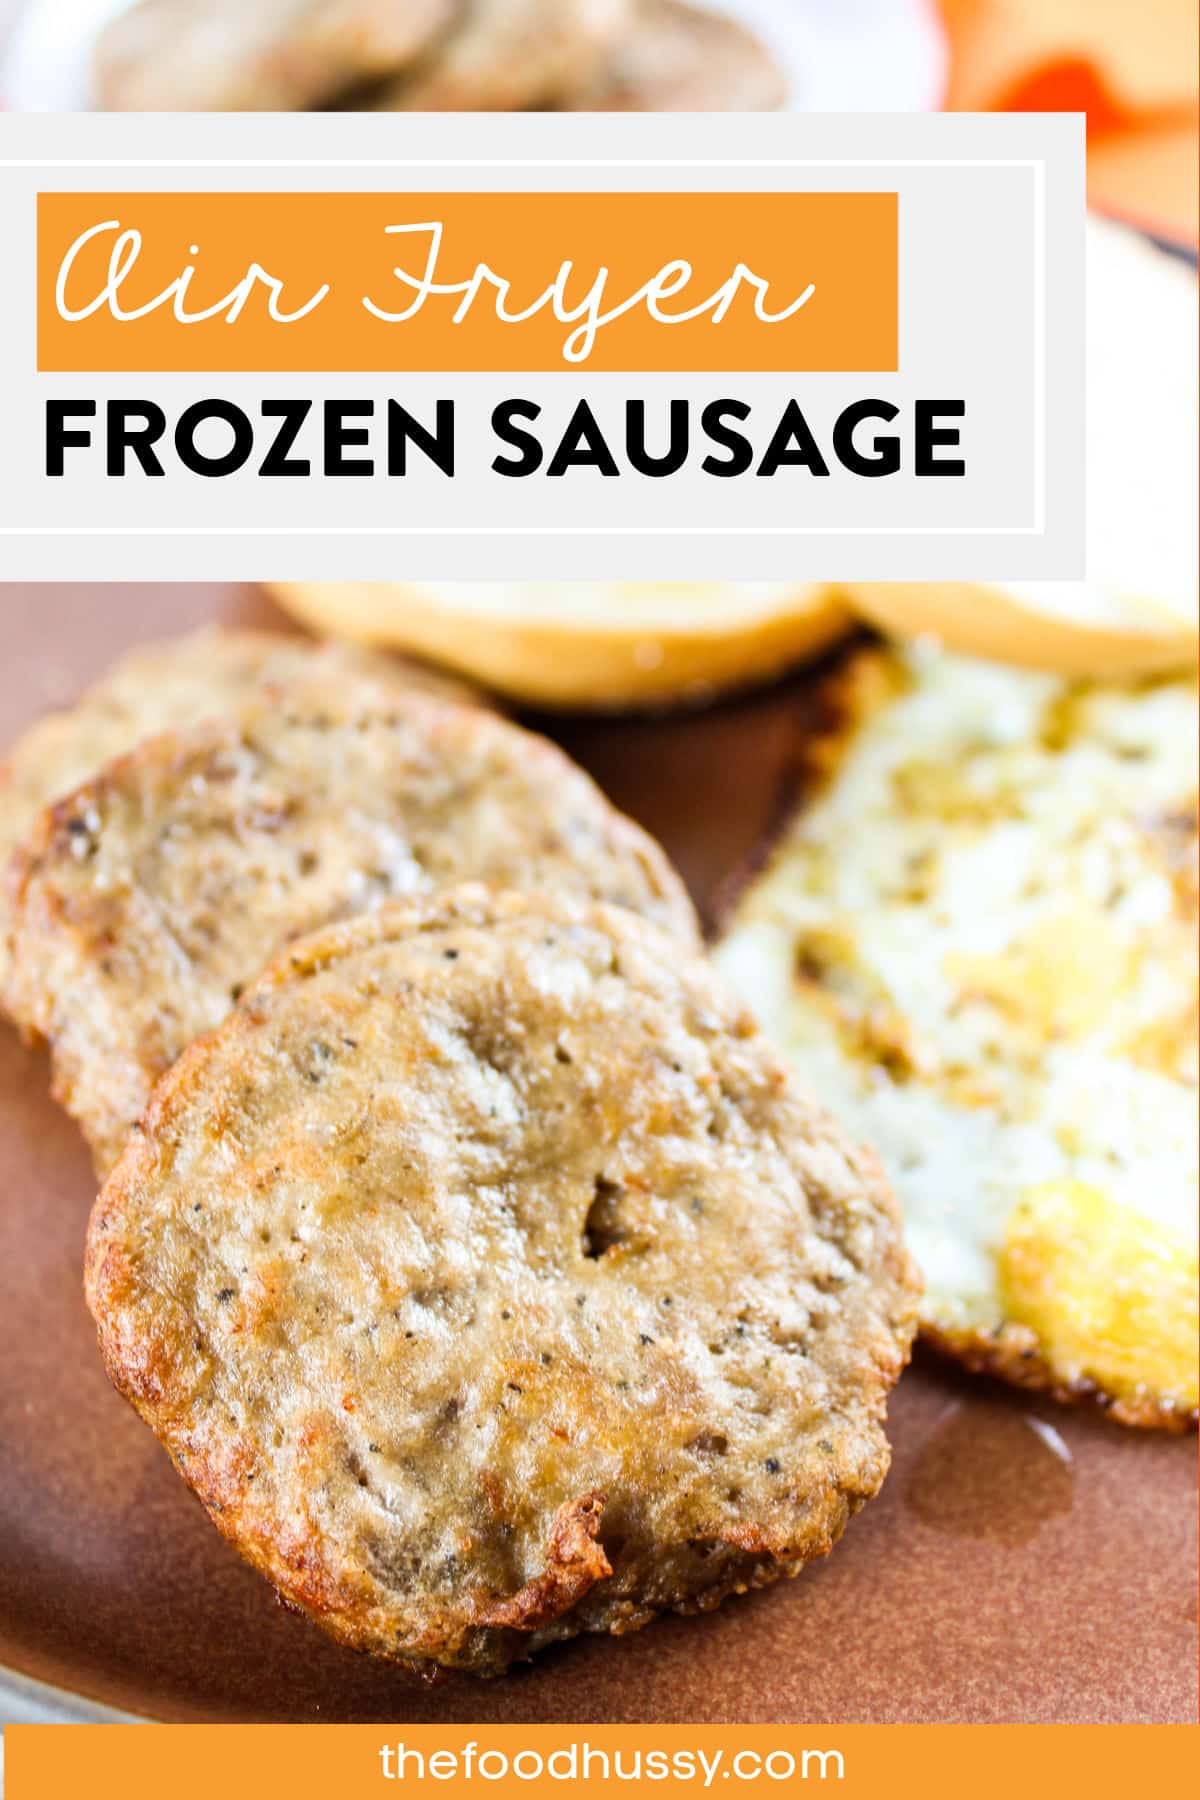 Frozen Sausage Patties in the air fryer are a simple way to make a breakfast side dish with no mess and no work! Just pop them in and hit the button. You'll be eating one of your favorite breakfast foods in minutes! via @foodhussy